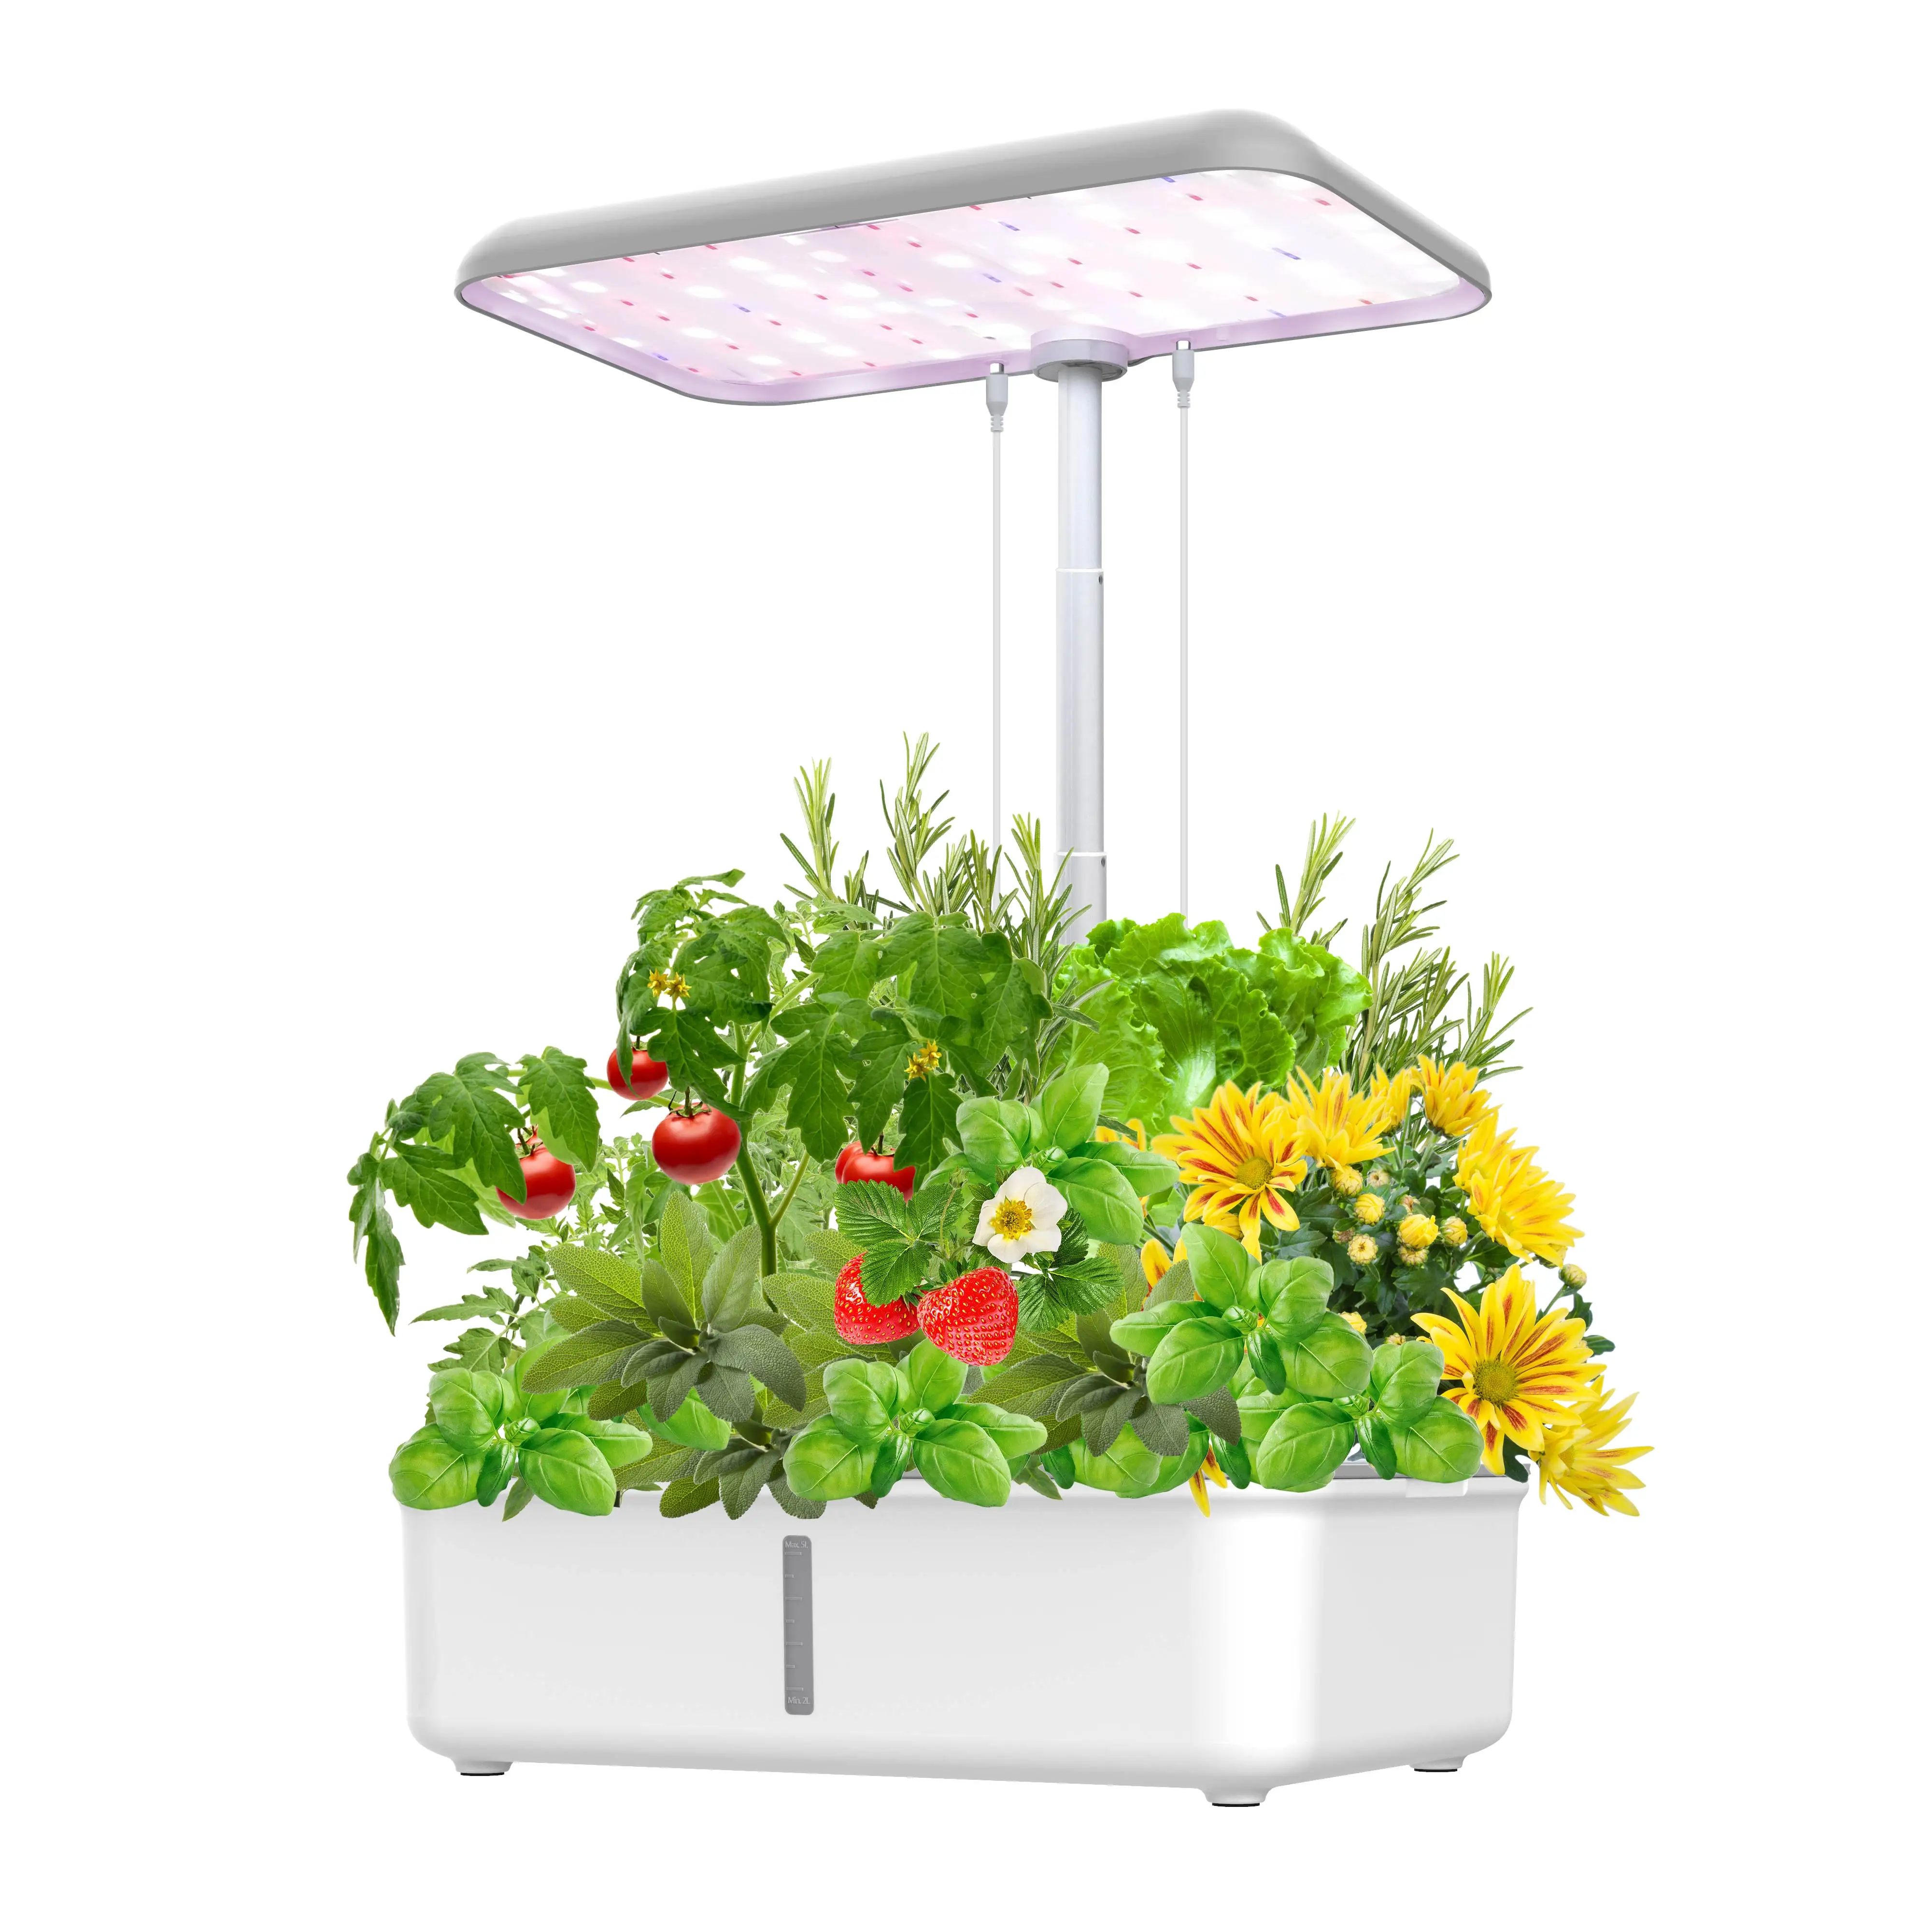 

Exclusive design 14 planting pots auto water Irrigation lettuce strawberry Tuya smart garden indoor grow hydroponics systems, White & gray